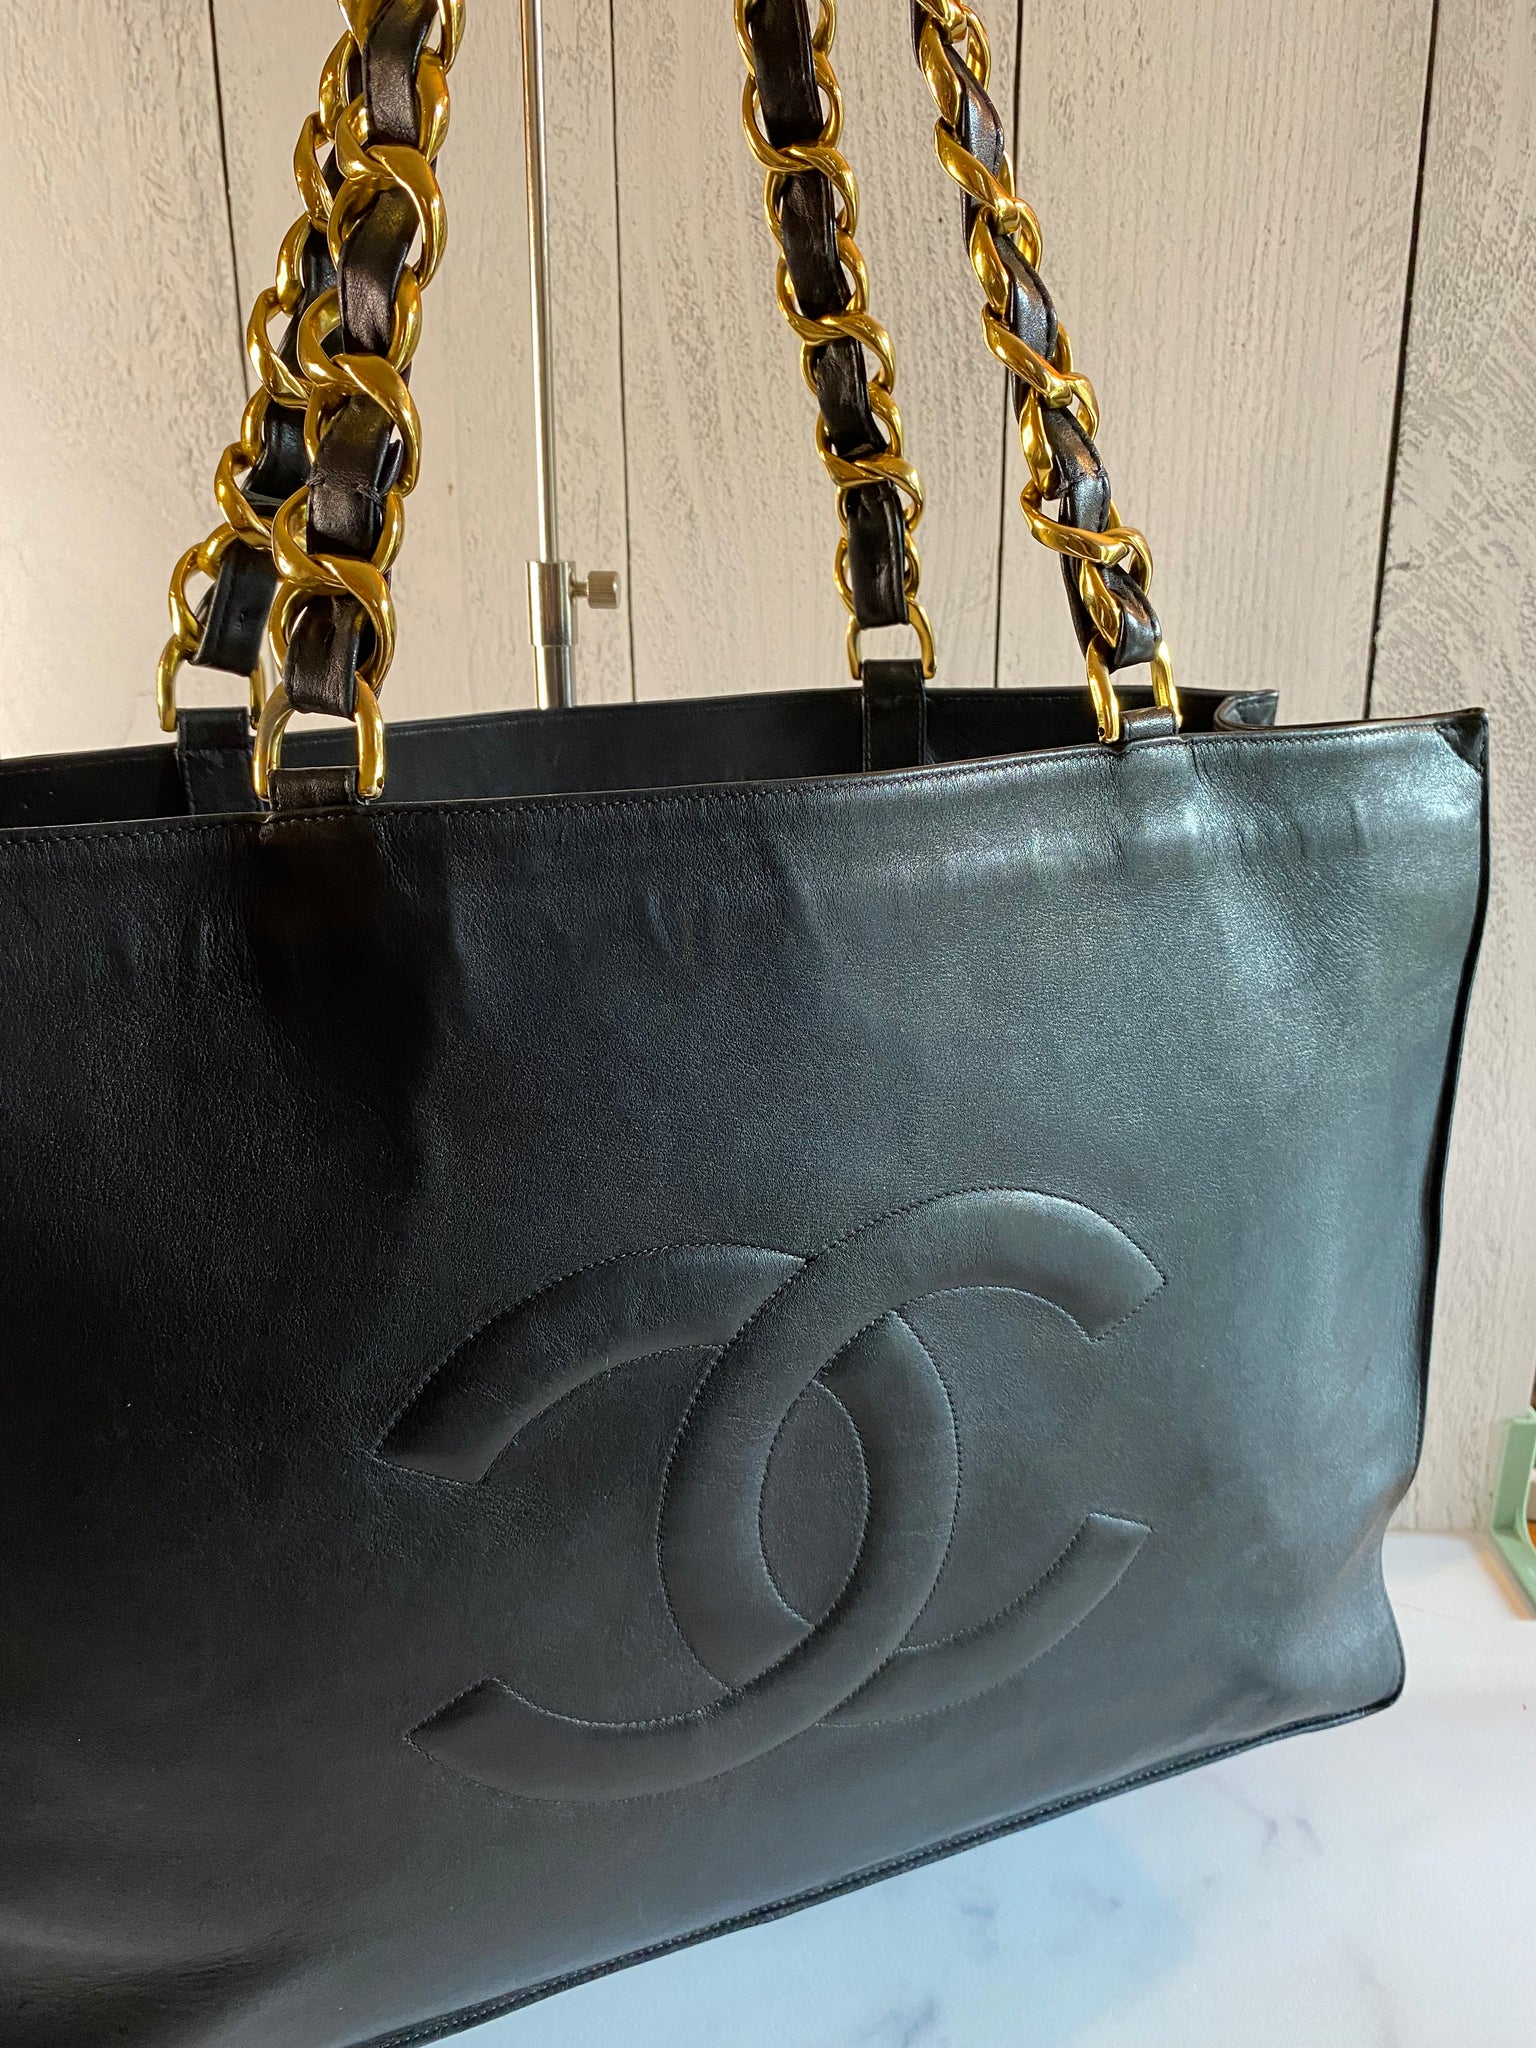 Vintage Chanel Jumbo XL Black Lambskin Leather Shoulder Shopping Tote Bag -  Mrs Vintage - Selling Vintage Wedding Lace Dress / Gowns & Accessories from  1920s – 1990s. And many One of